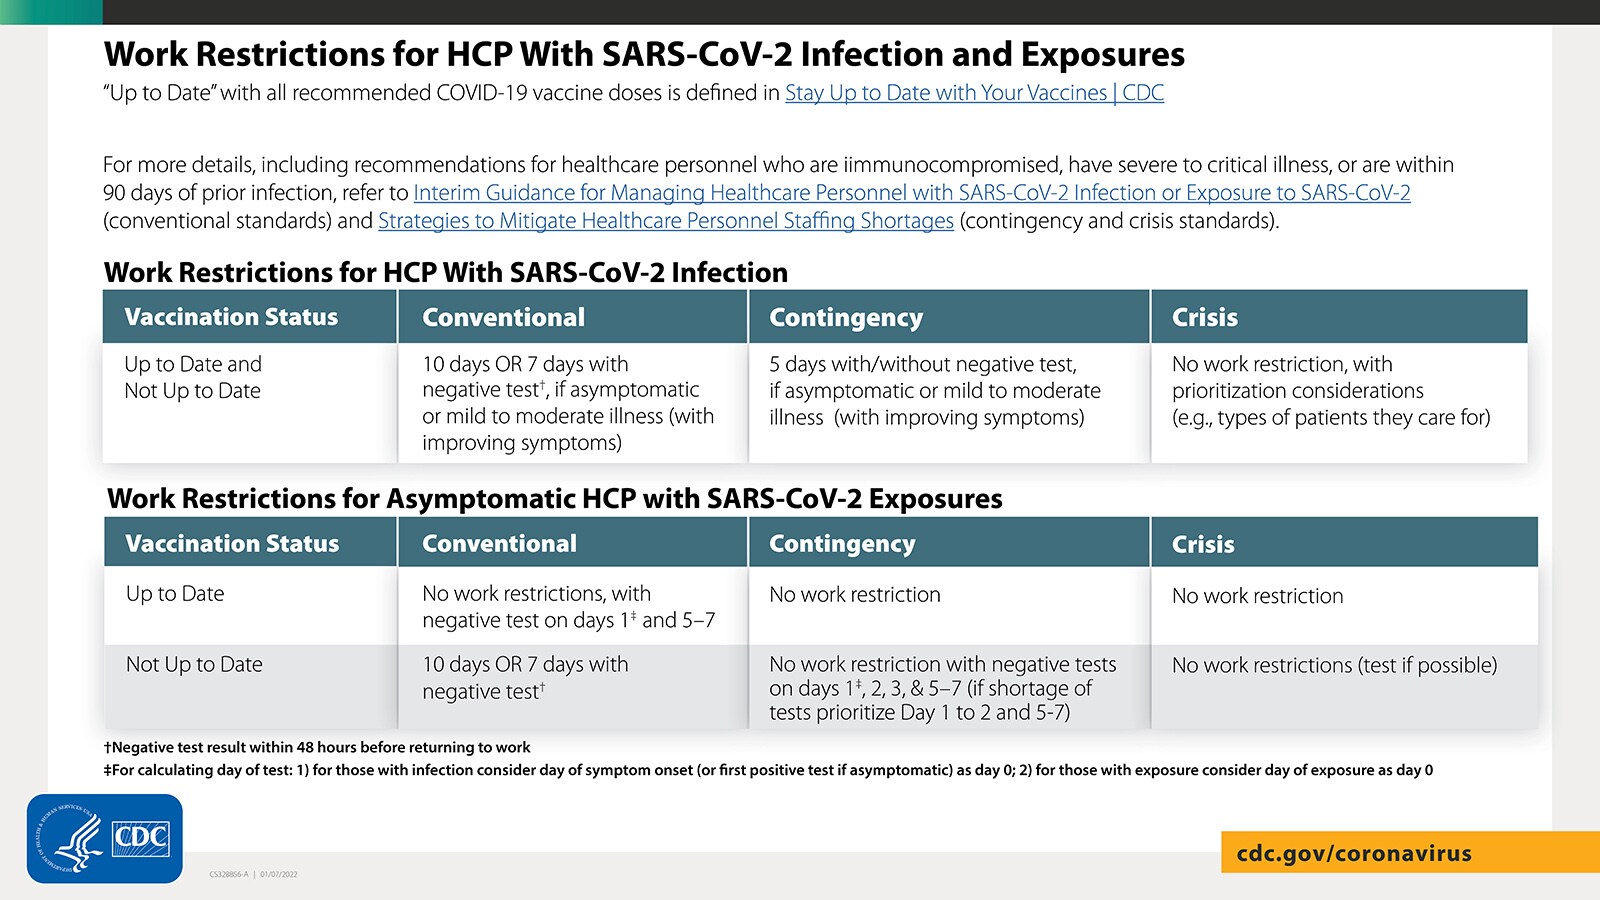 work restrictions for HCP with SARS-VoV02 infection and exposures